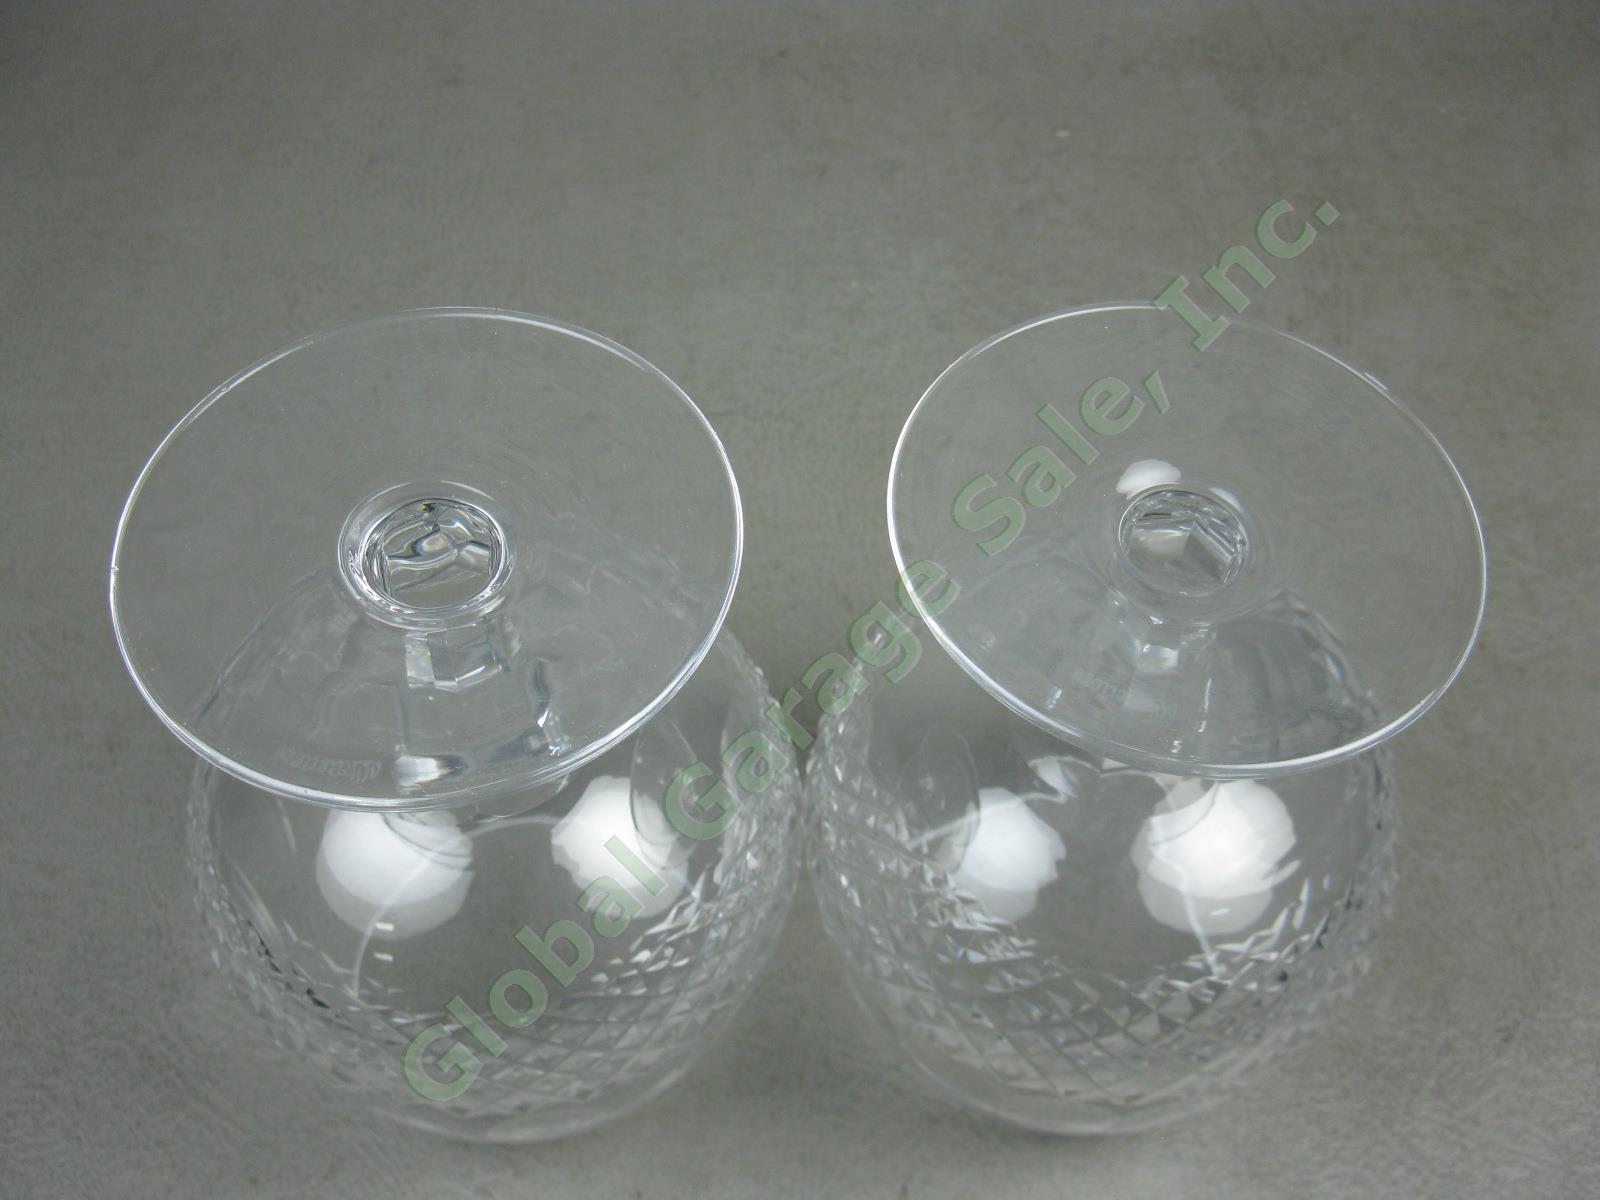 2 Waterford Cut Lead Crystal Colleen Brandy Snifter Glasses Set Lot 5-1/8" Tall 2